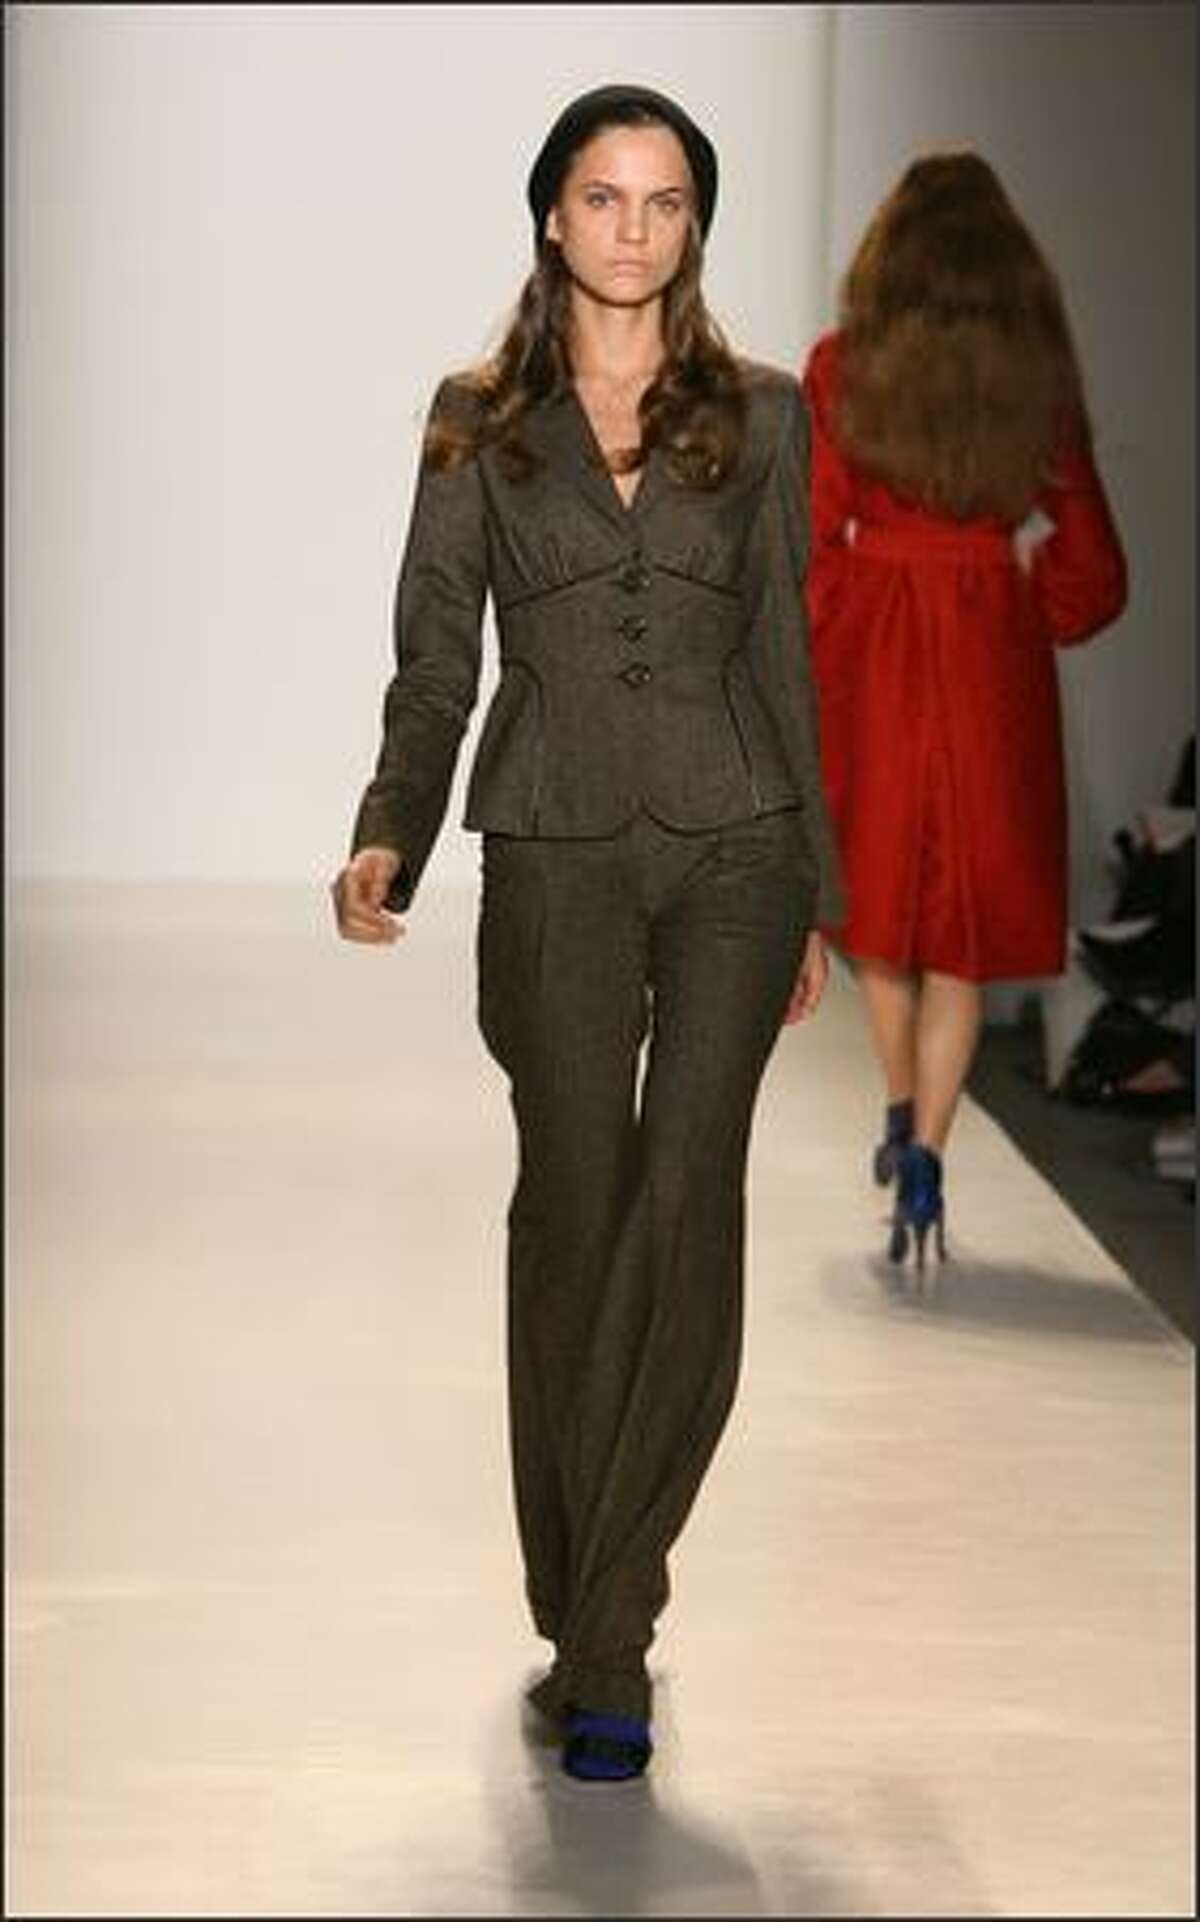 A model walks the runway at the Cynthia Steffe fall 2008 fashion show during Mercedes-Benz Fashion Week at The Salon at Bryant Park in New York.